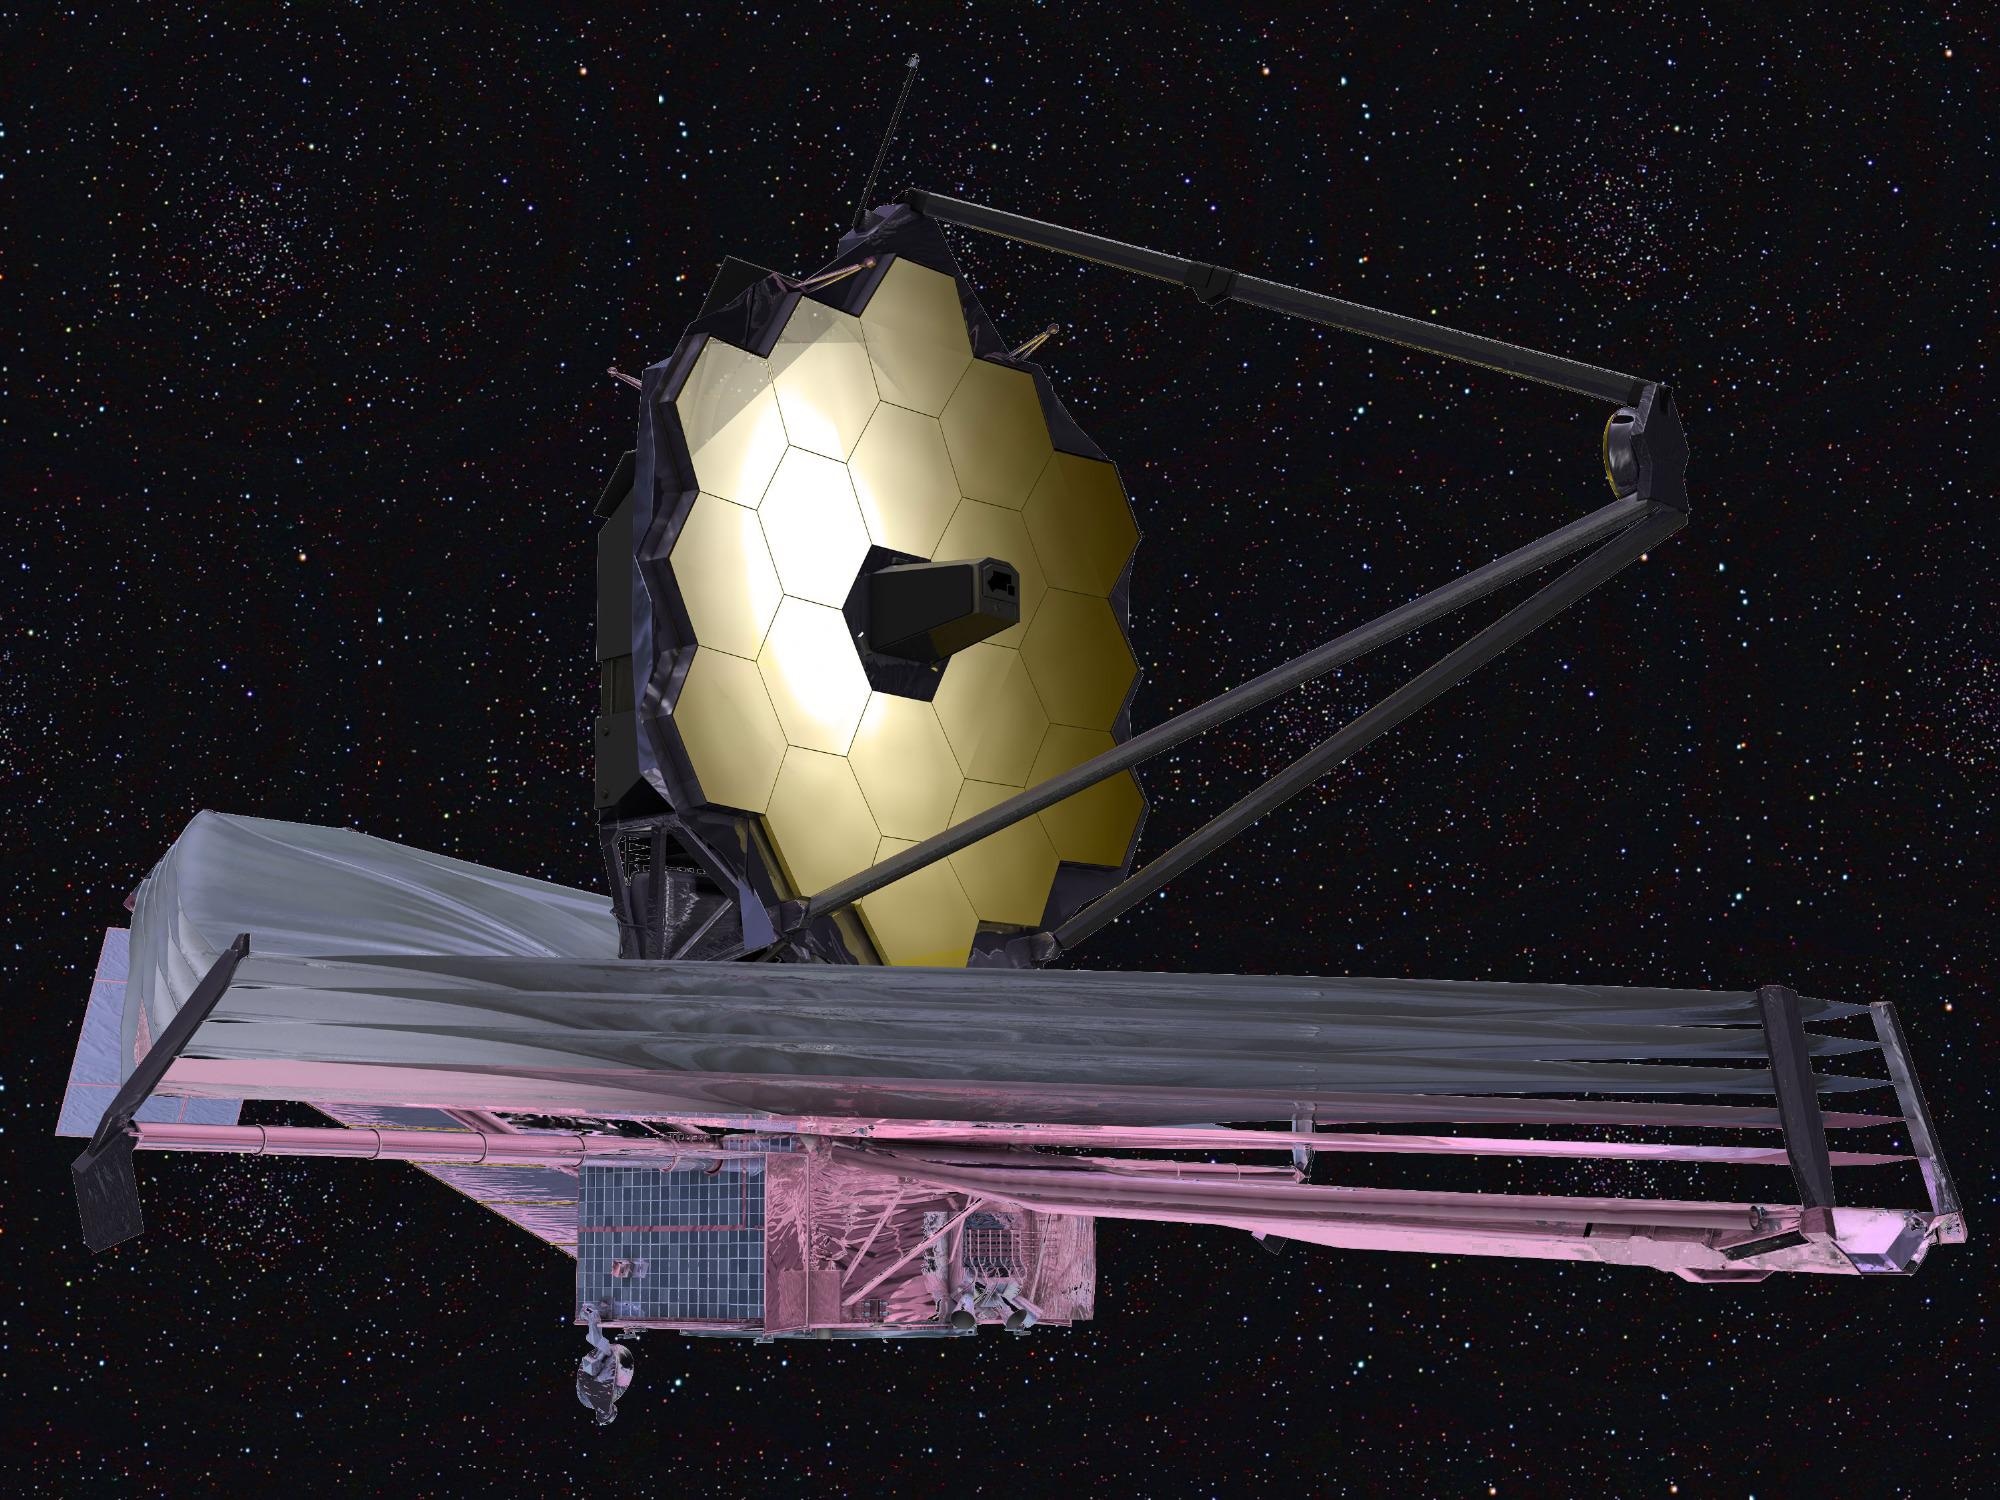 New Telescope Offers Hope to Explore Potential Life Around the Smallest Stars.